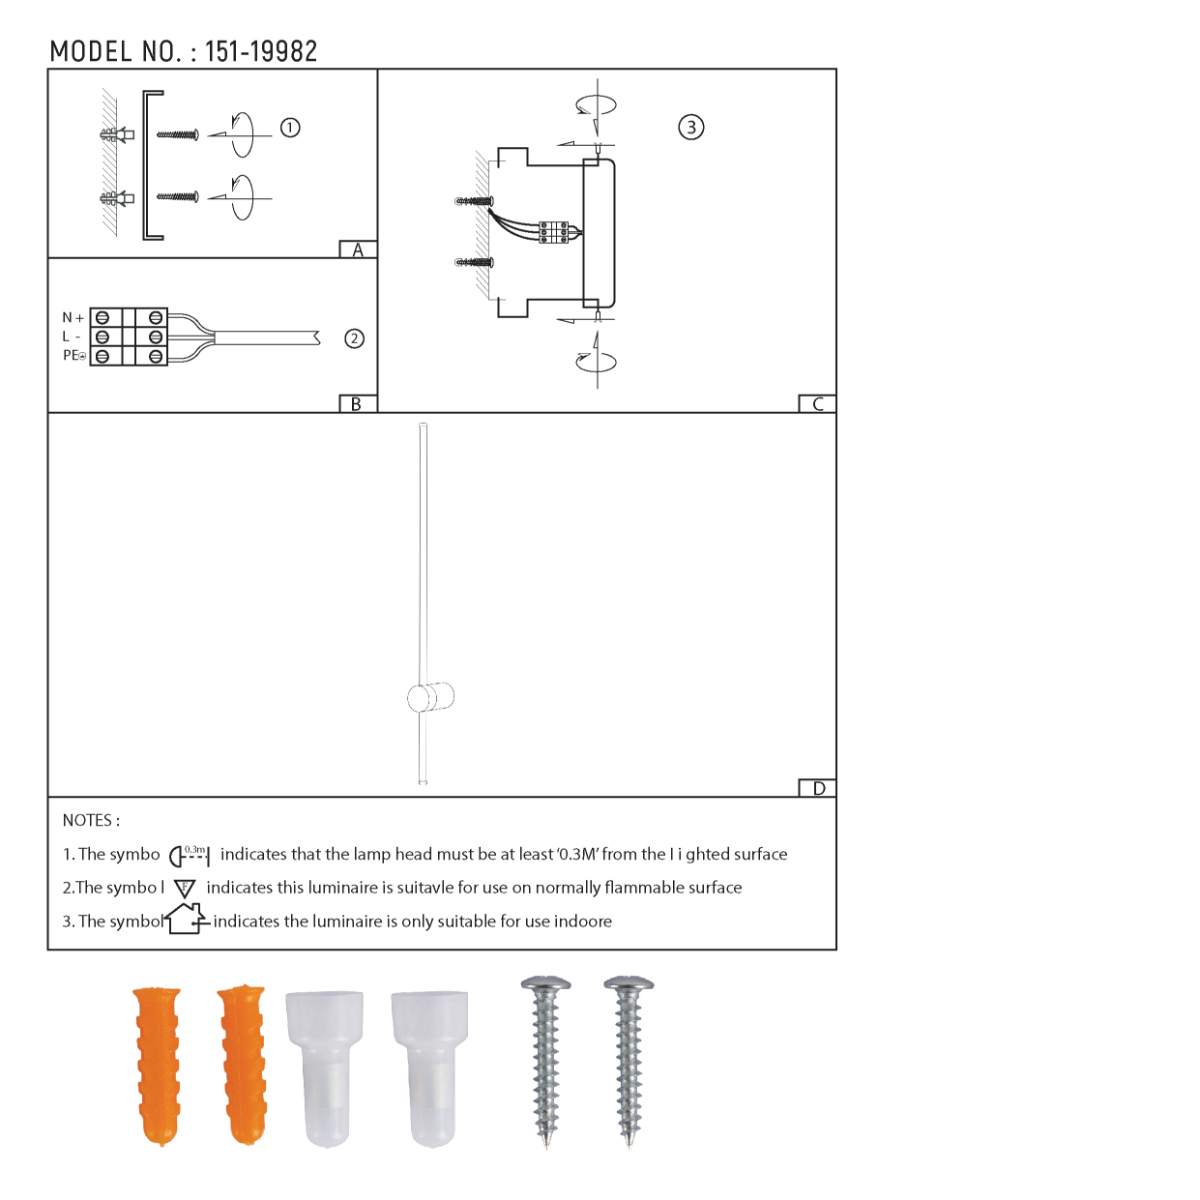 Technical specs of Minimalist Linear Wall Sconce Light 151-19982